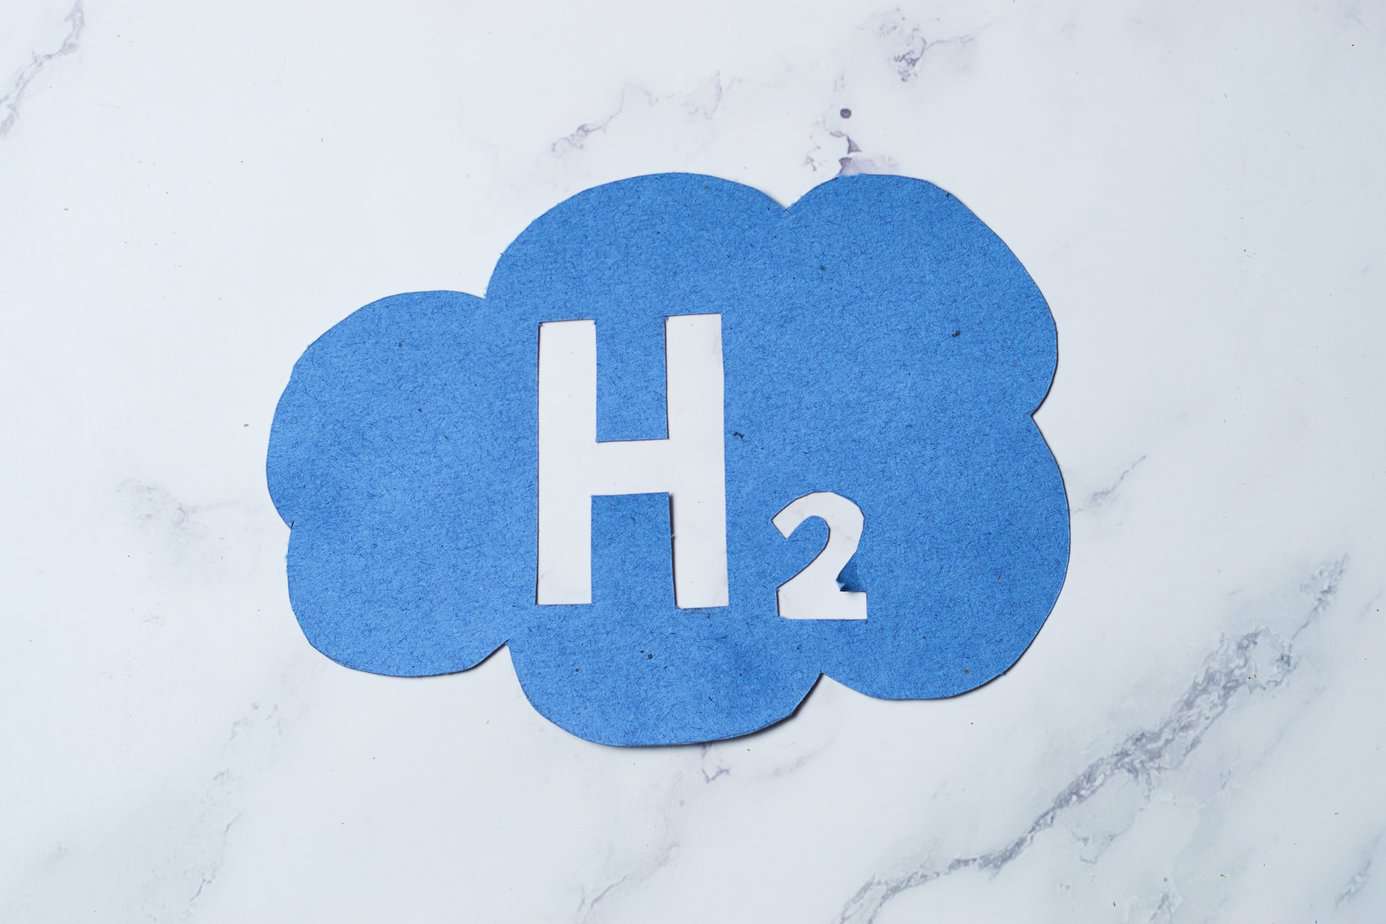 Energy and fuel with hydrogen emissions.